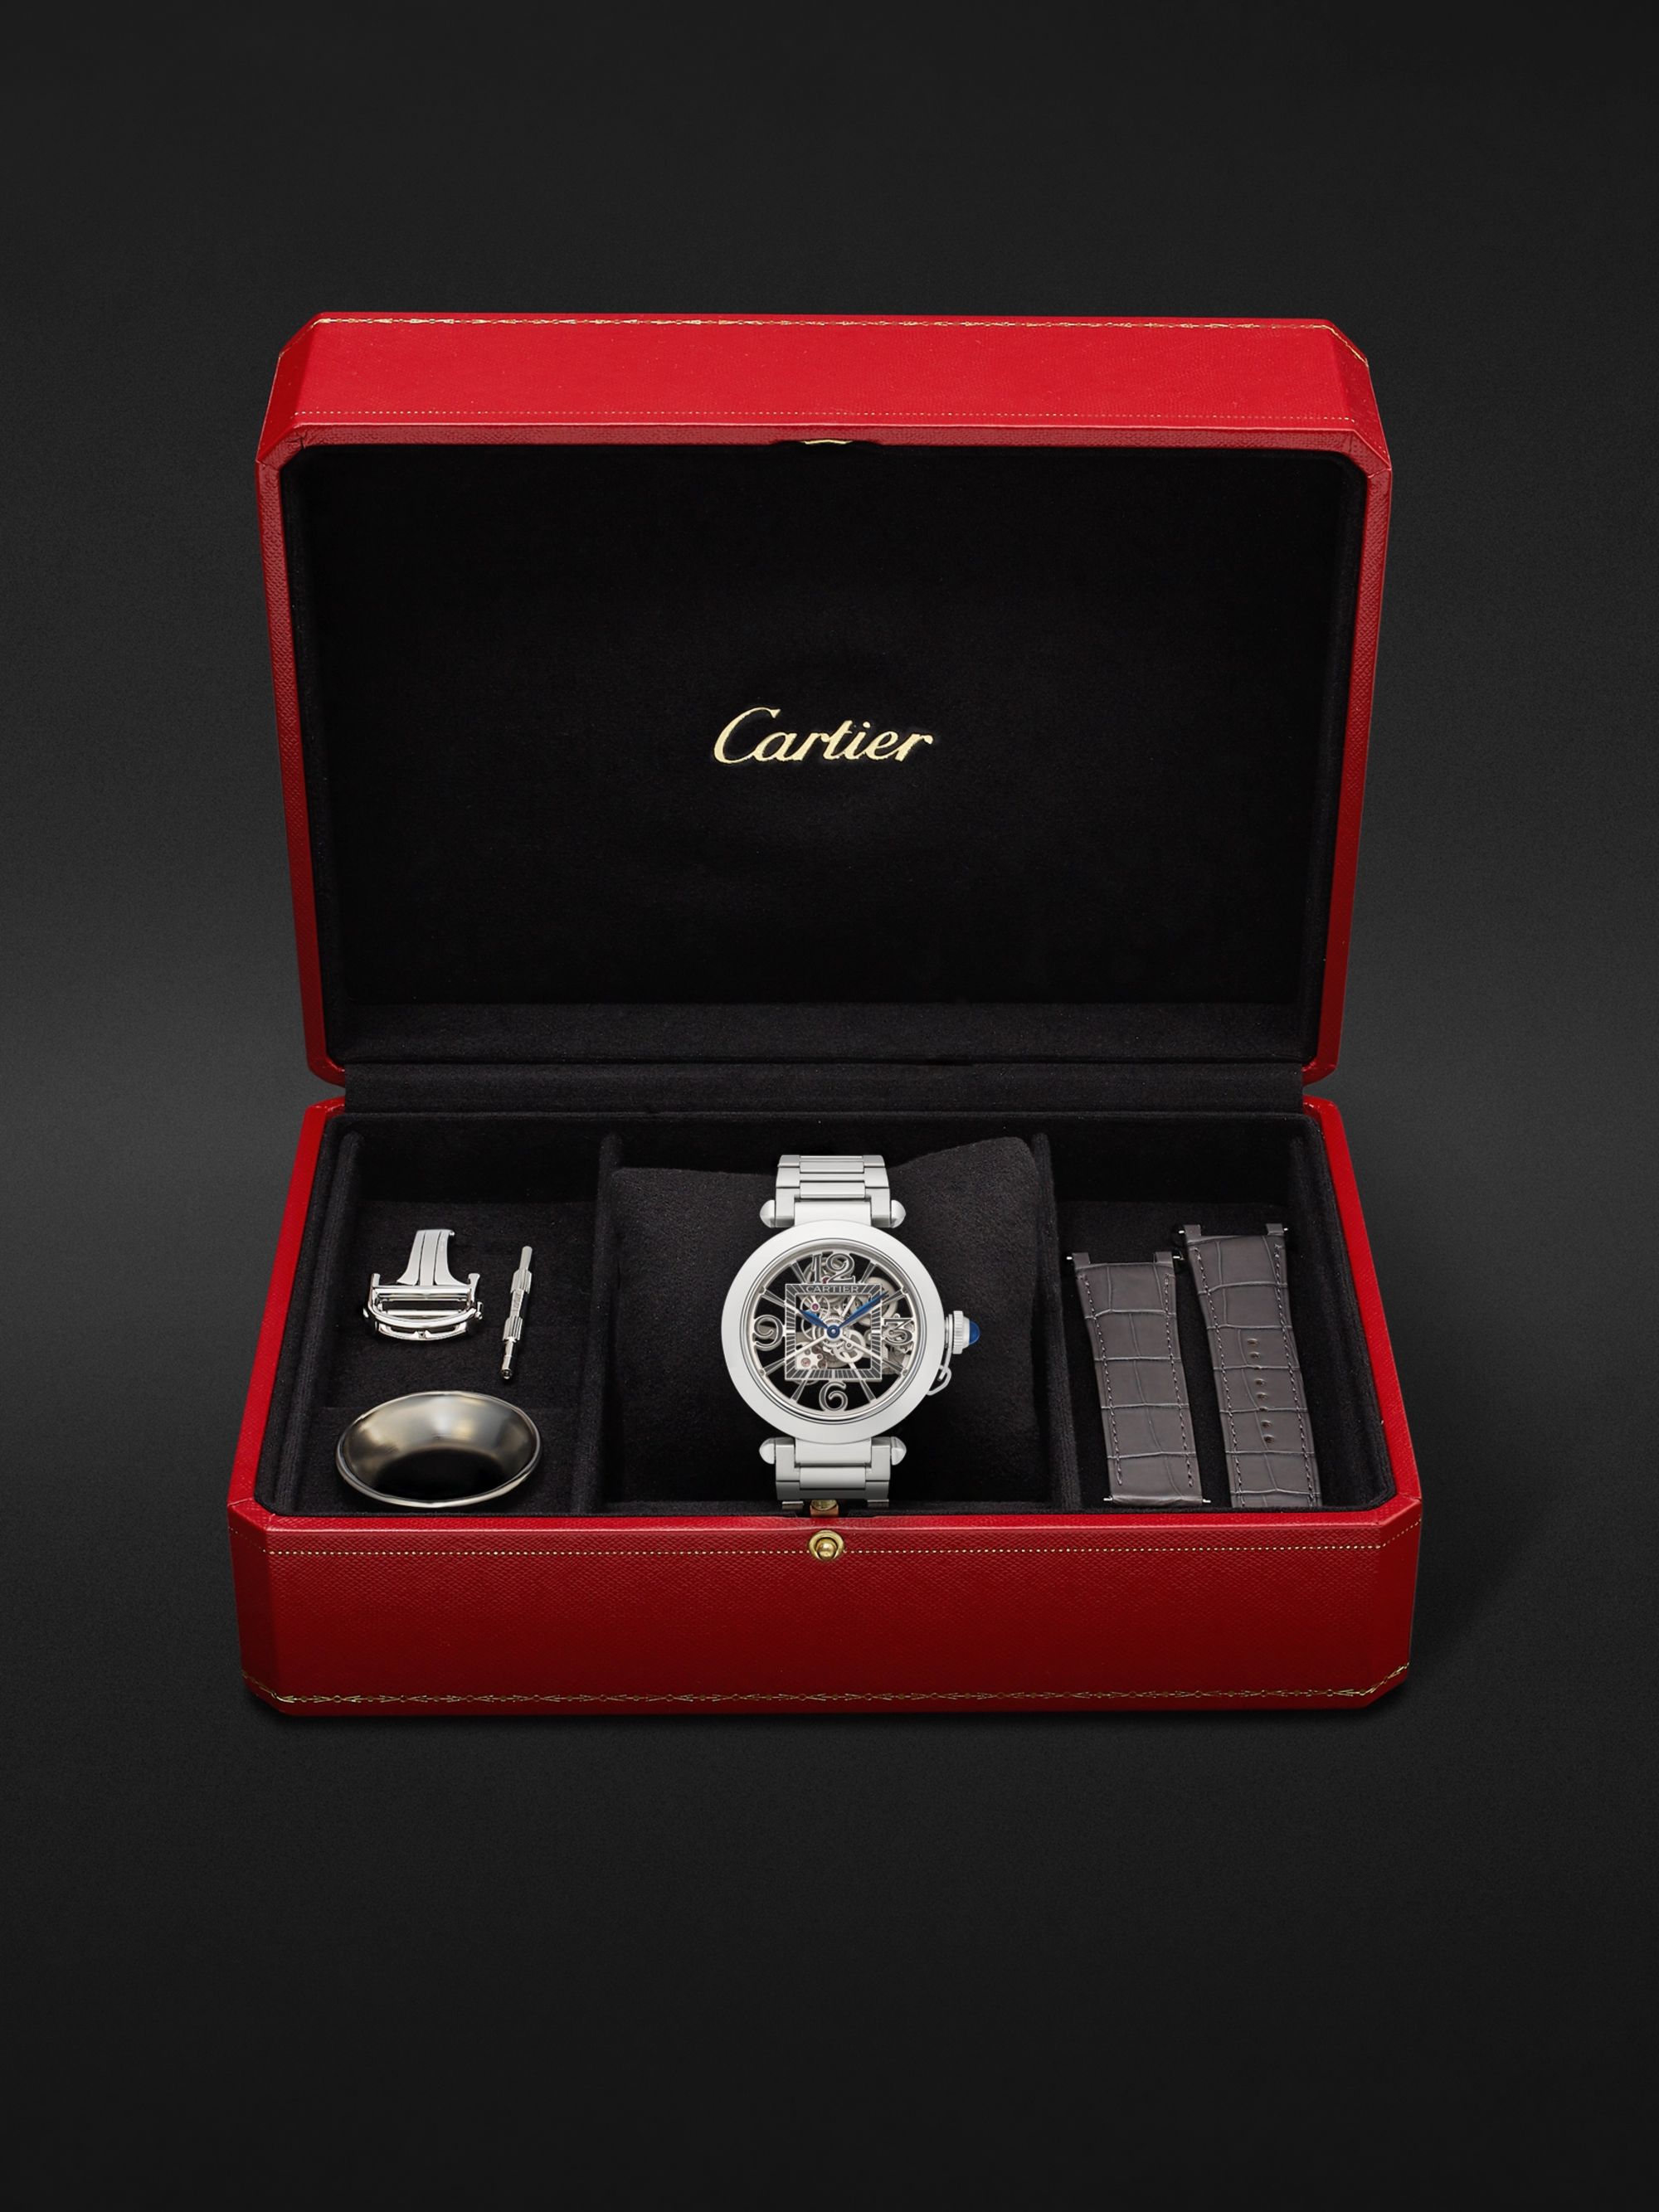 CARTIER Pasha de Cartier Automatic 41mm Interchangeable Stainless Steel and Alligator Watch, Ref. No. WHPA0007